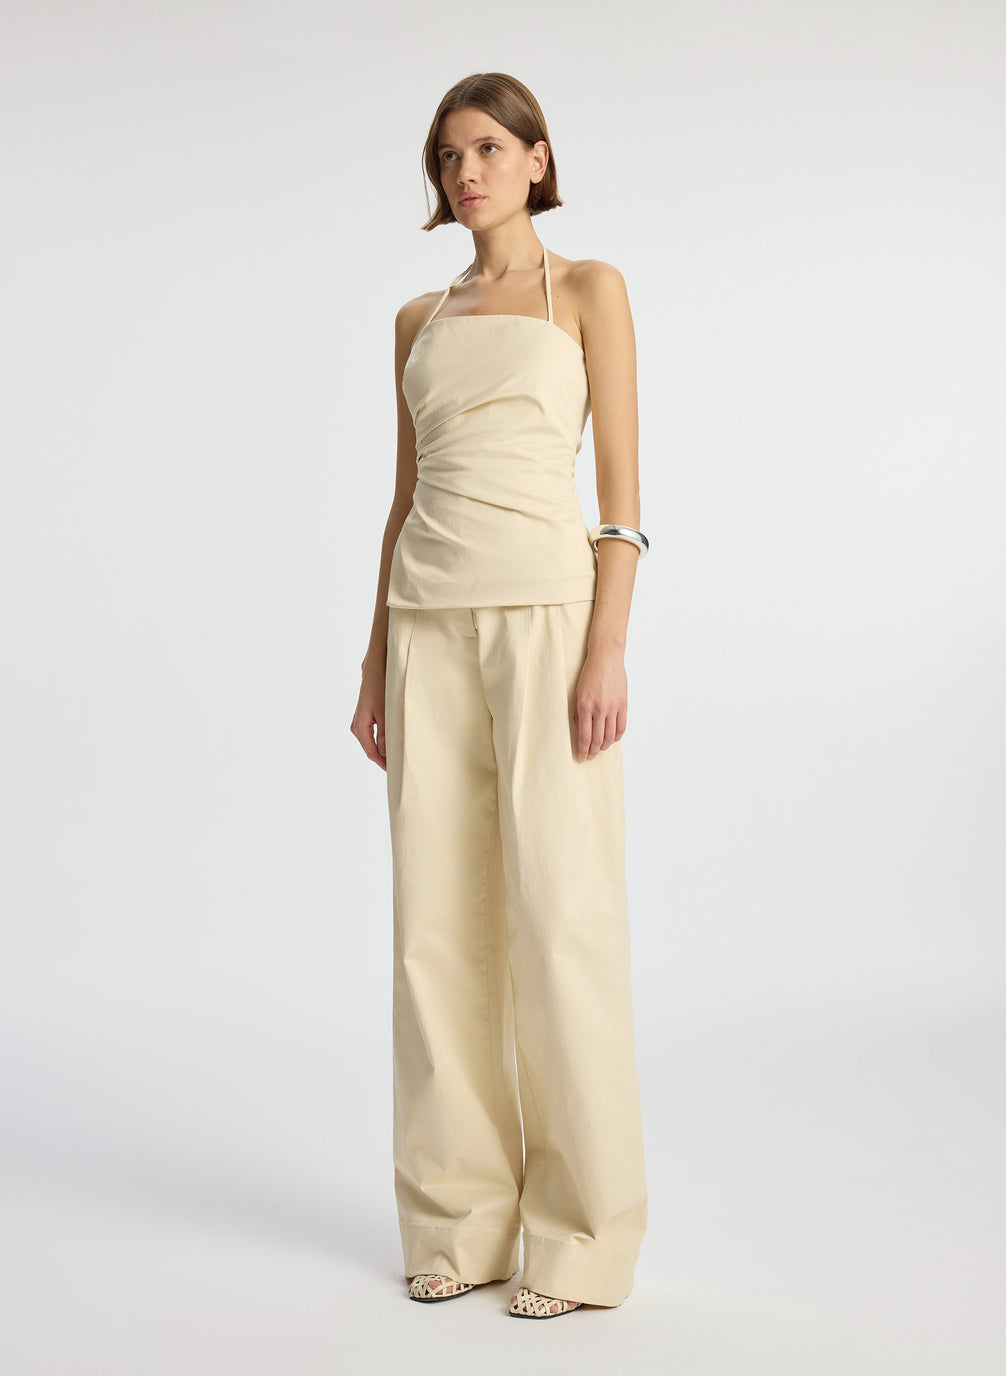 side  view of woman wearing beige halter top with side ruching and beige wide leg pant